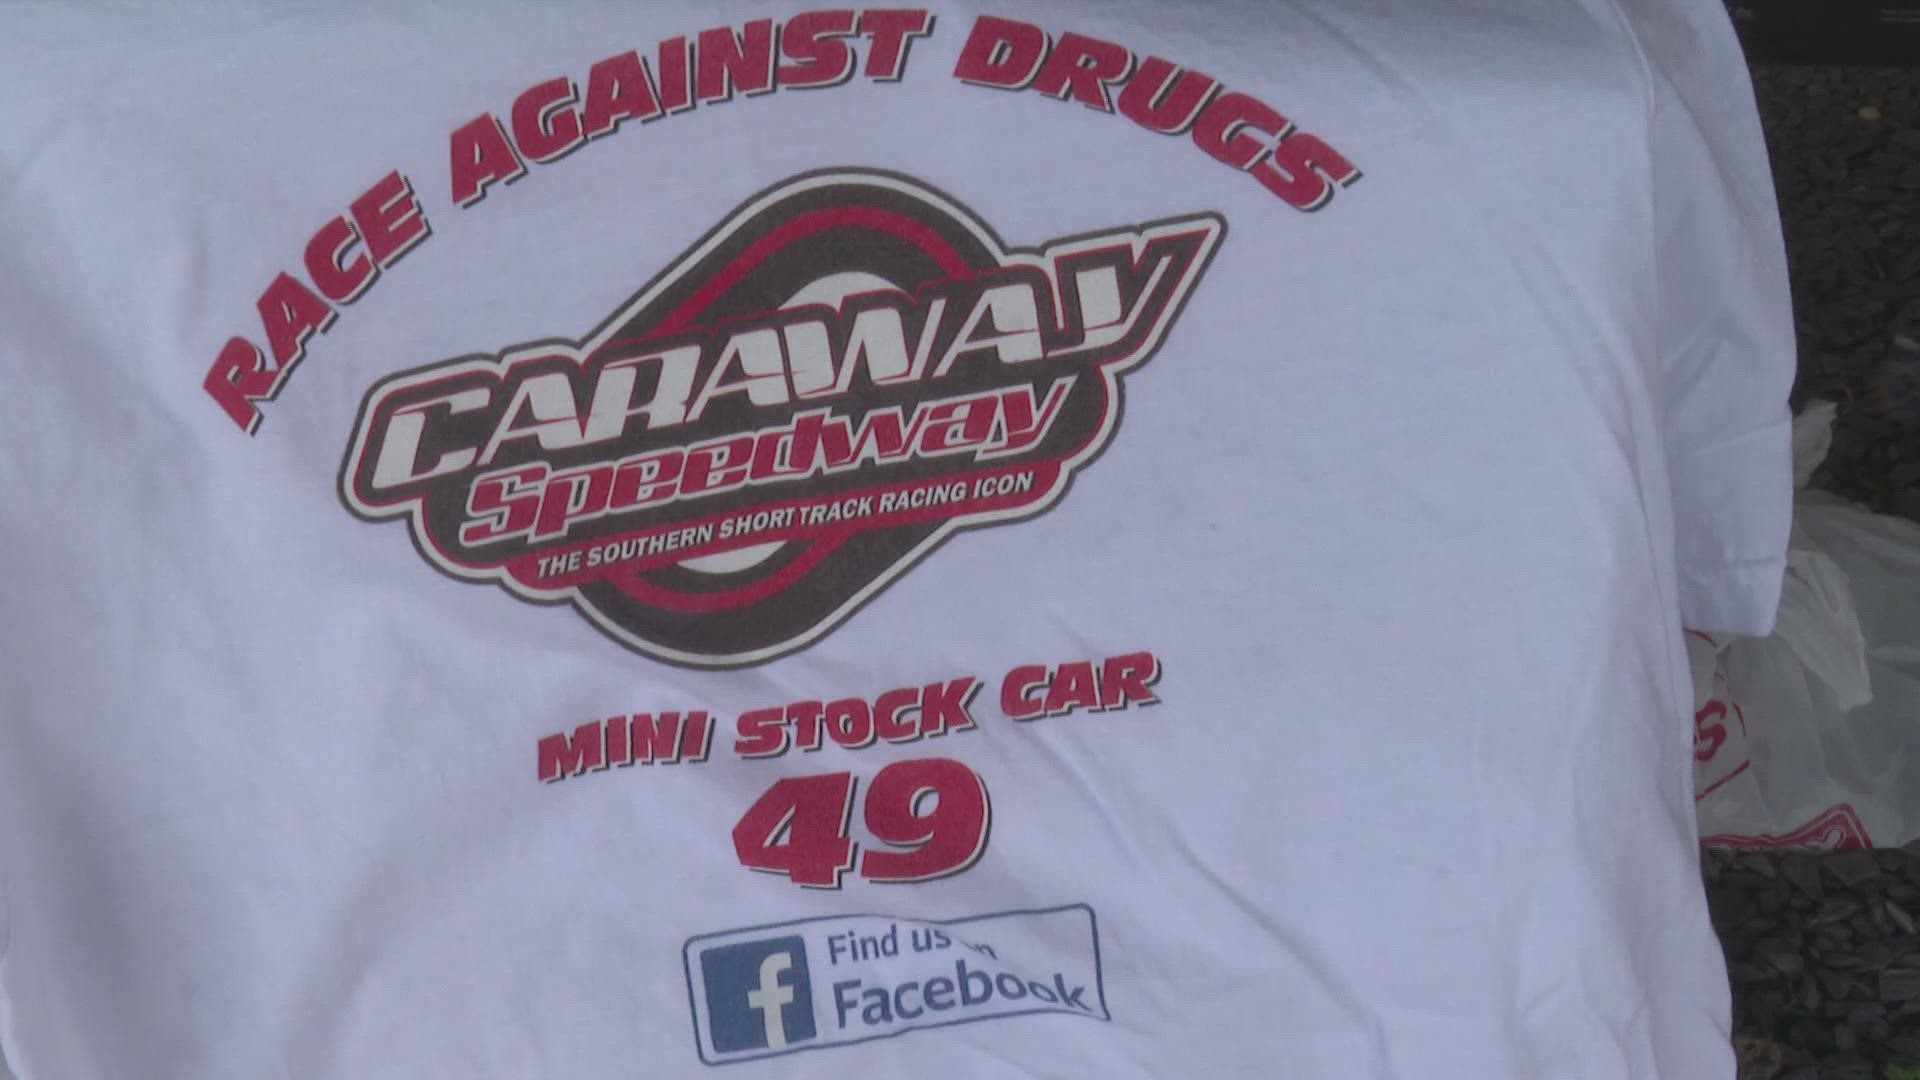 Mike Loomis is partnering with Carroway Speedway for the "Race Against Drugs".